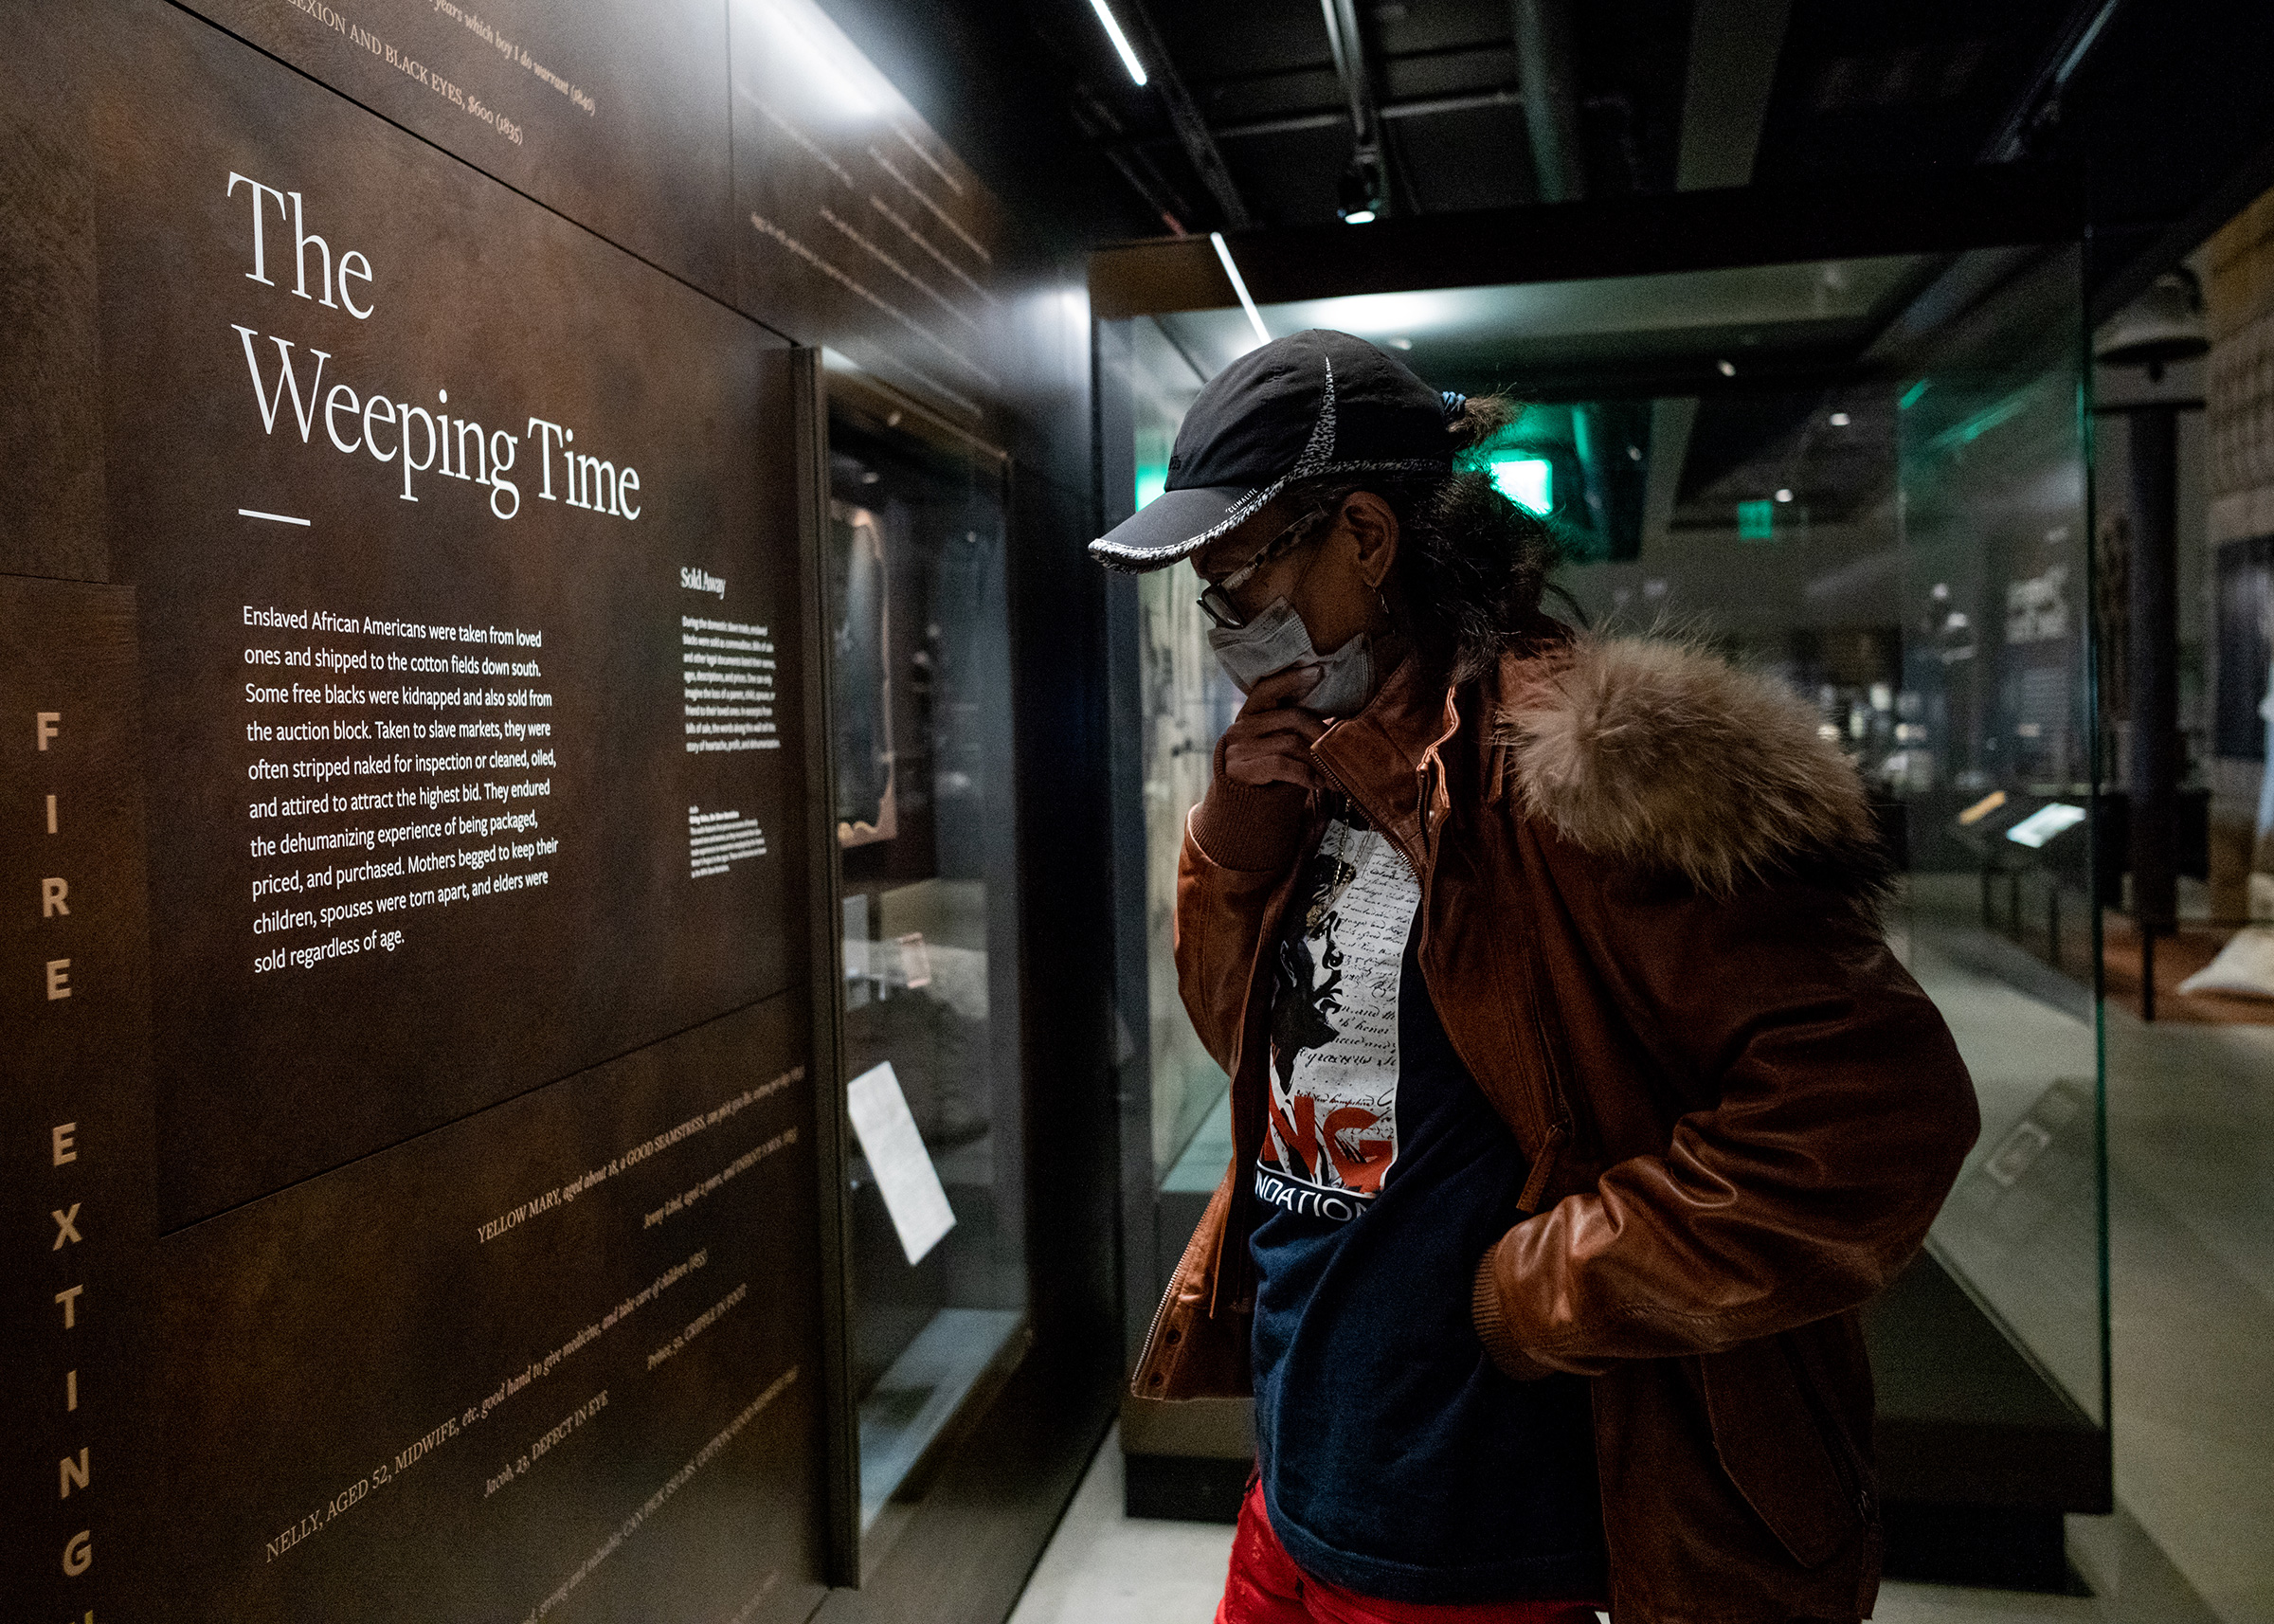 Dennetta King, ex-wife of Rodney King, touring the National Museum of African American History and Culture on Feb. 27, reading about the frequency and manner in which enslaved families were torn apart by sales. (Ruddy Roye for TIME)